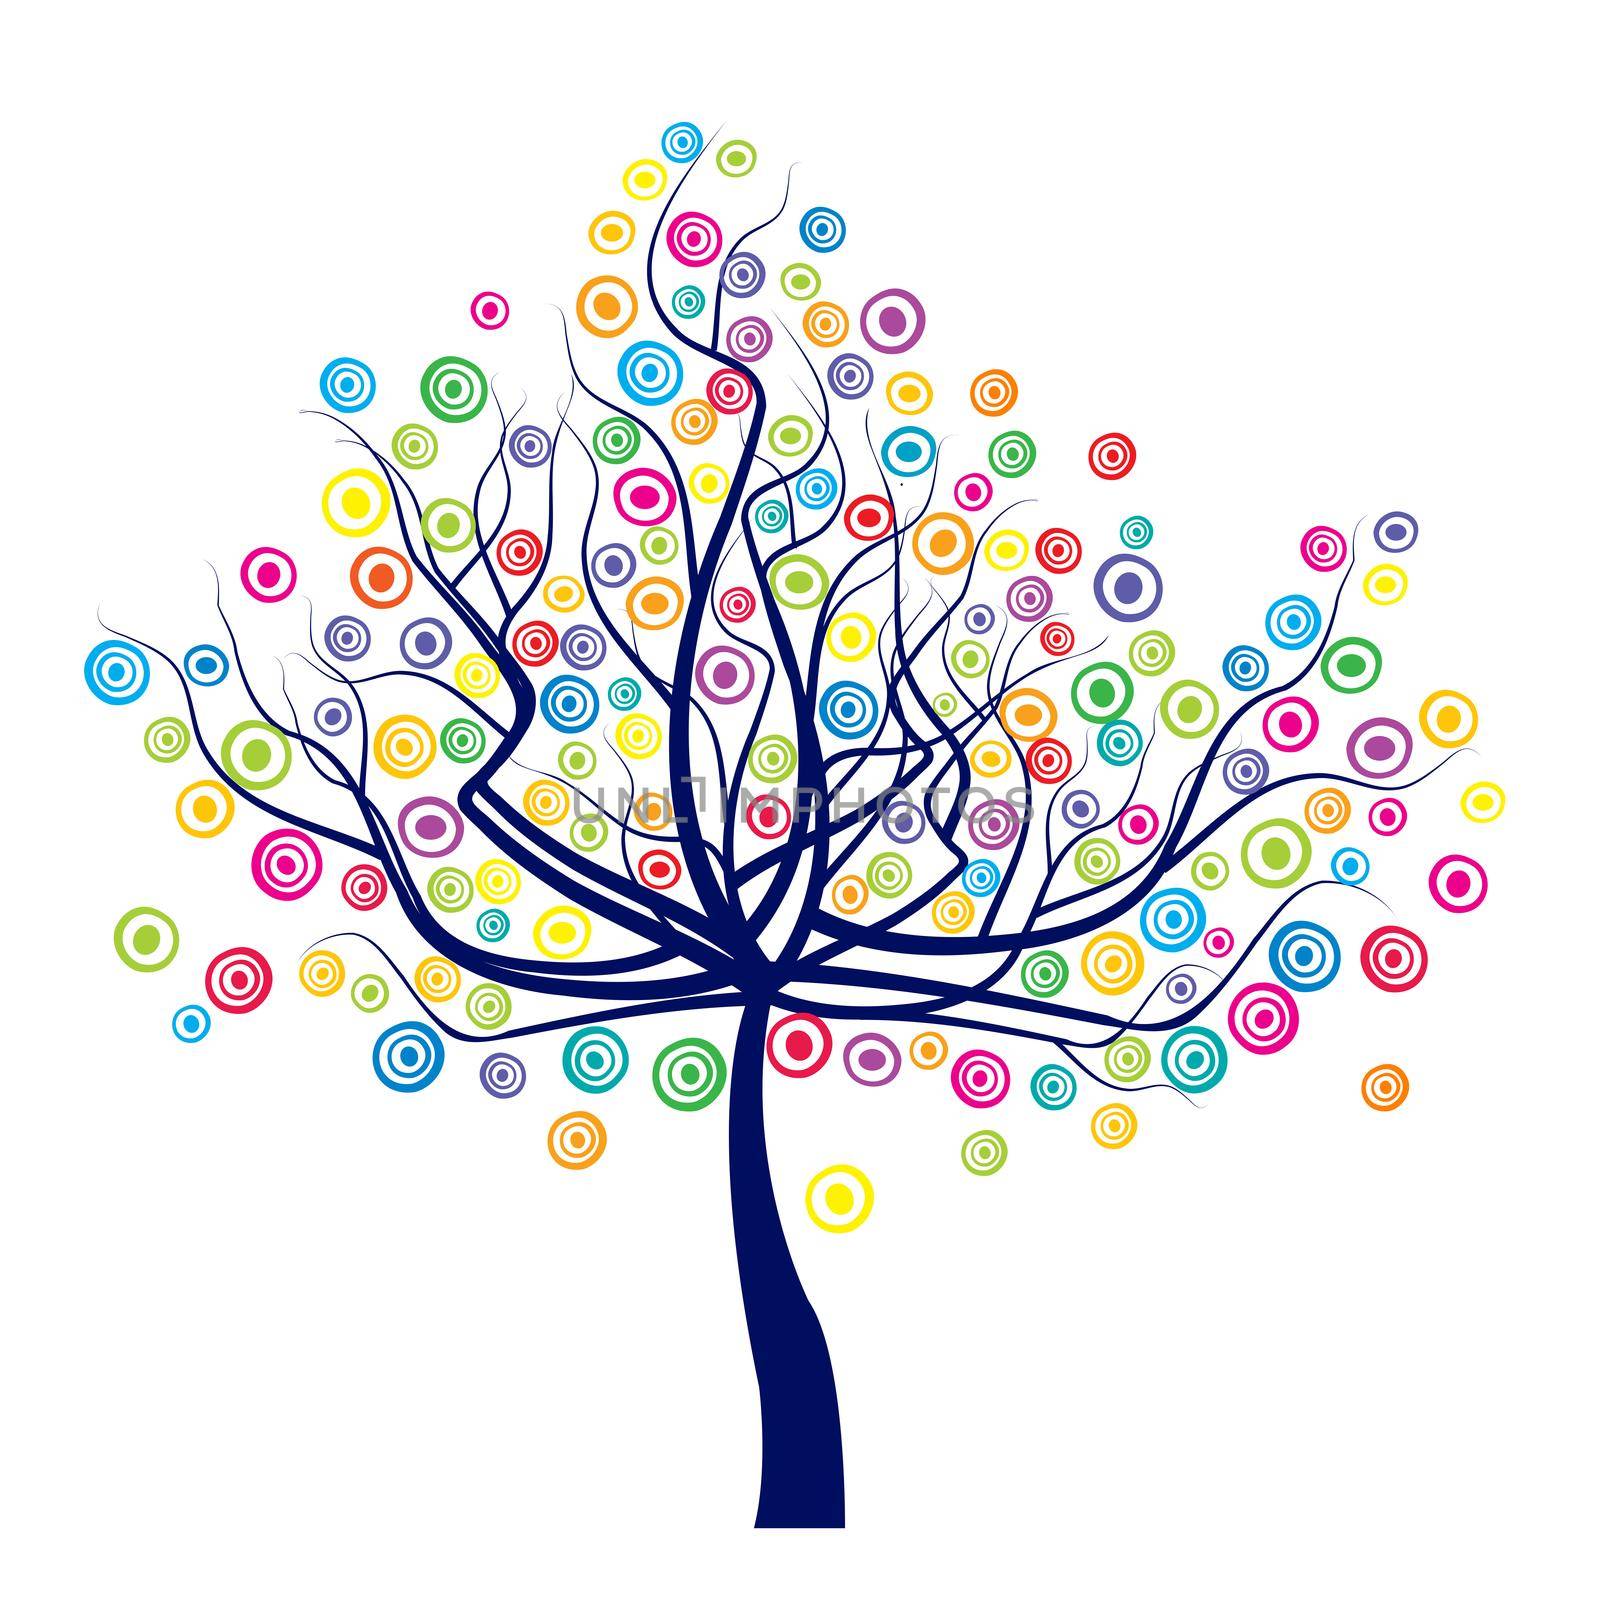 Abstract tree with colored circles